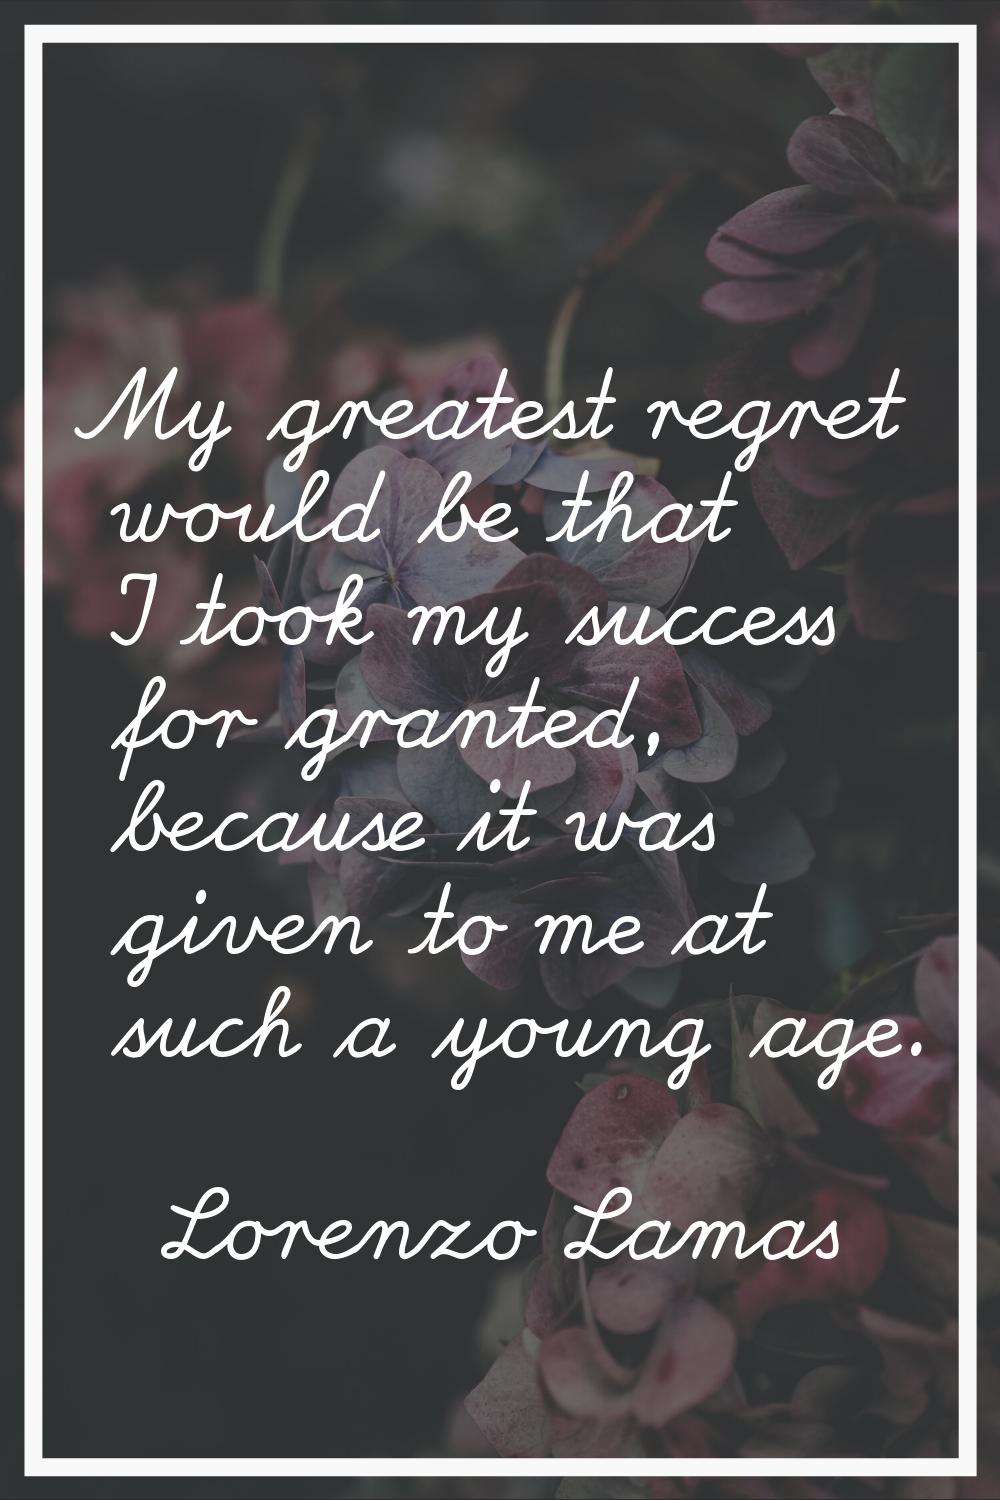 My greatest regret would be that I took my success for granted, because it was given to me at such 